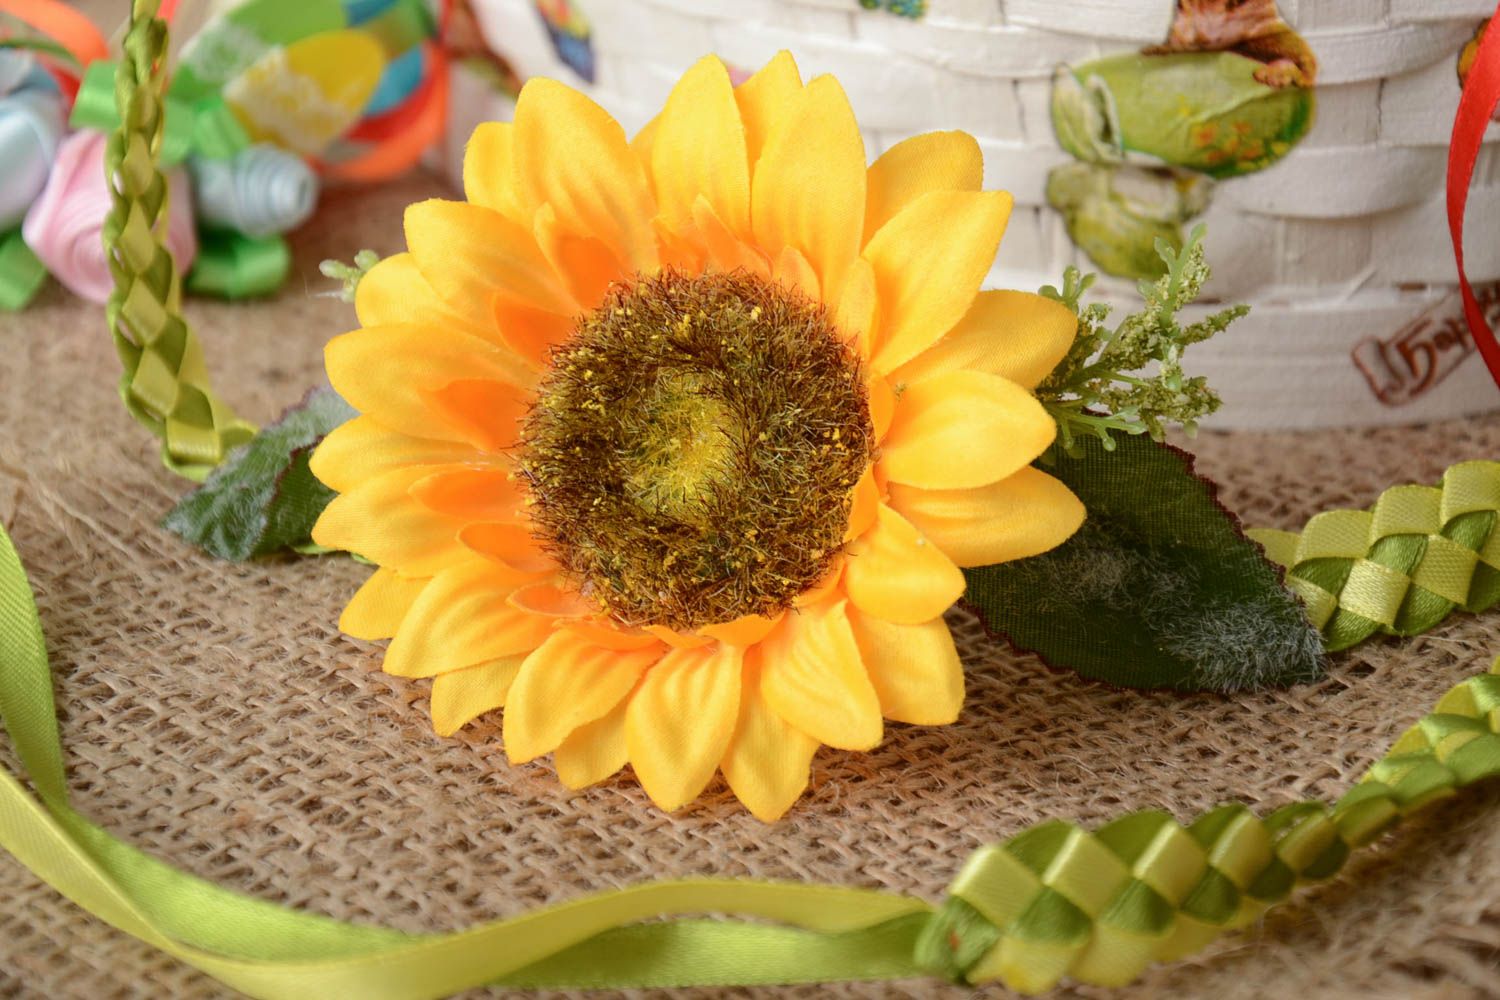 Handmade decorative summer headband woven of green ribbons with large sunflower photo 1